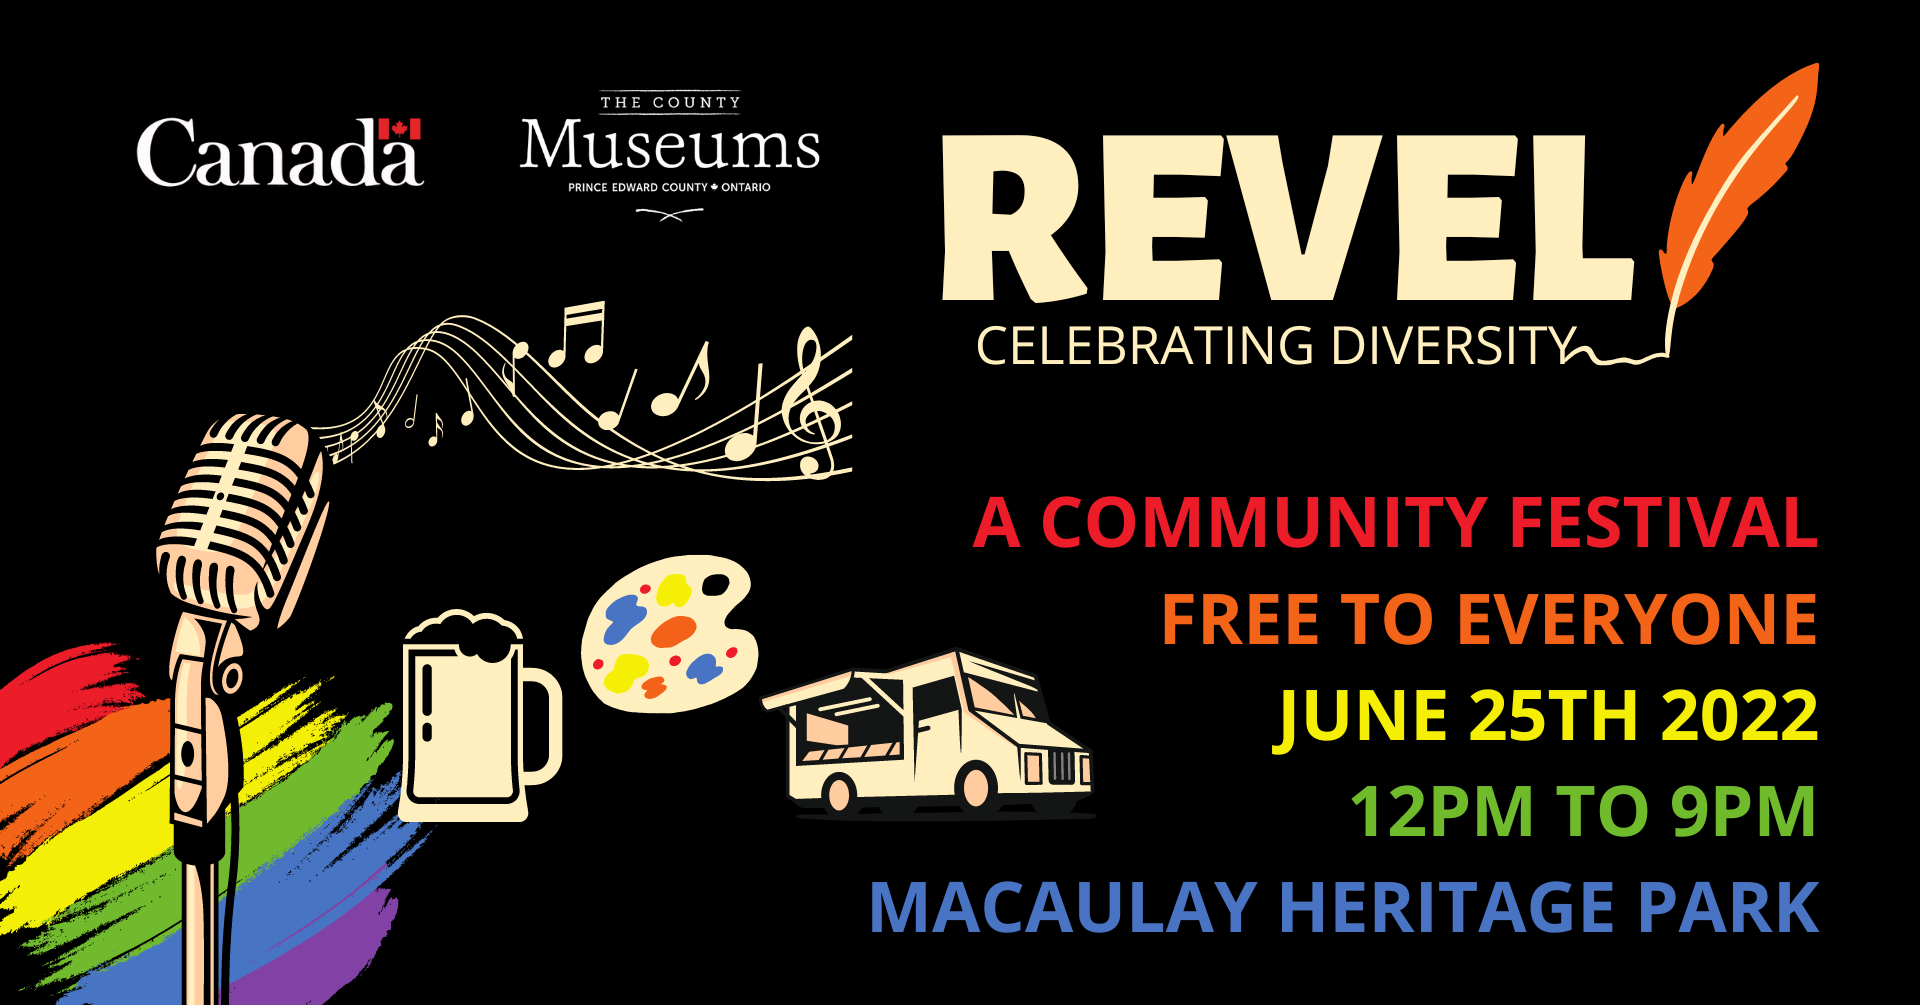 Promotional graphic for Revel with illustrations of a microphone, beer stein, art supplies, food truck and rainbow on it.